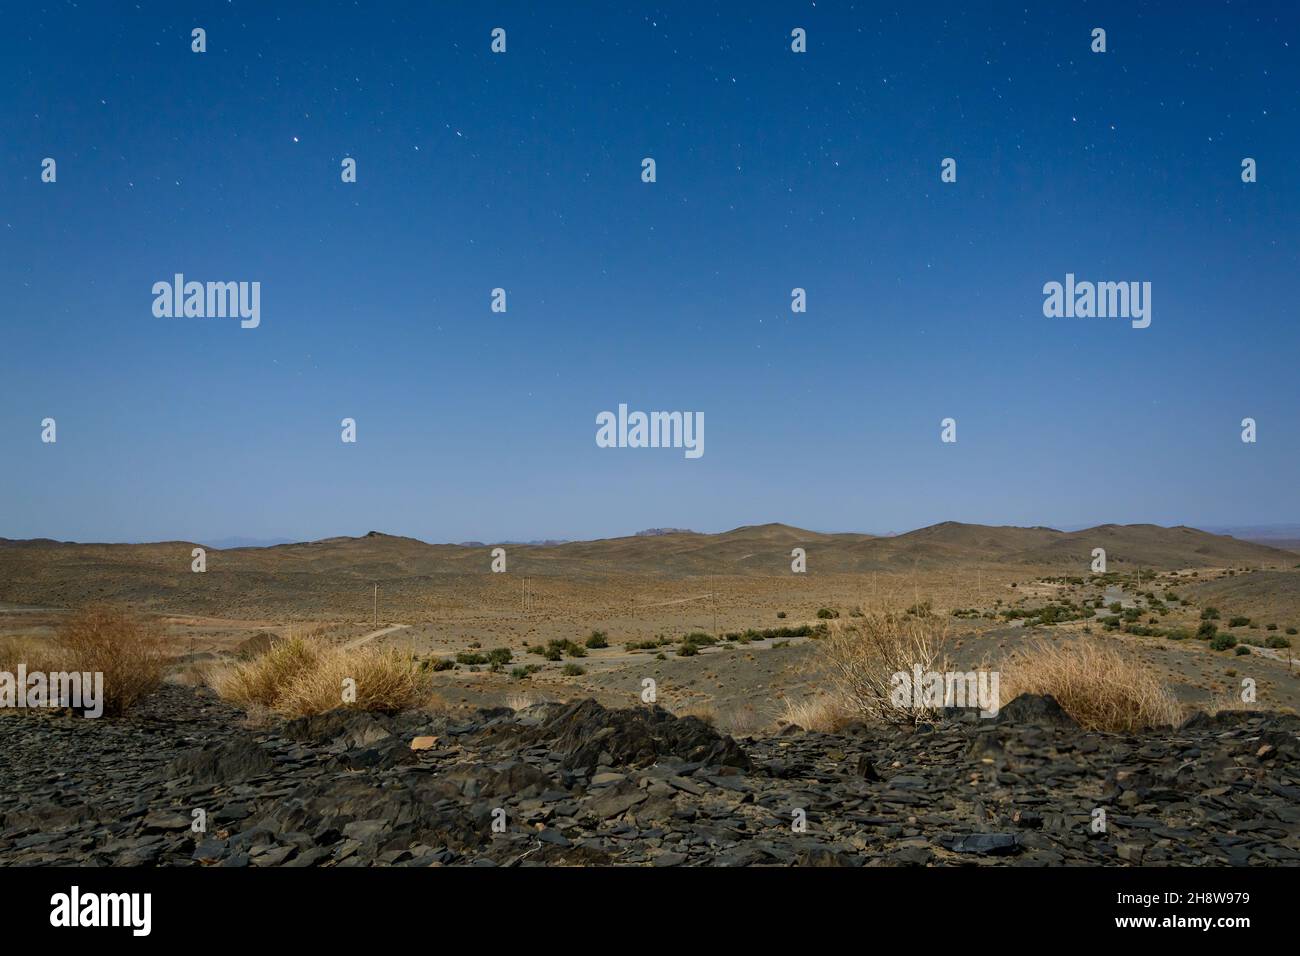 night view from plants and hills in desert with moon light and stars in iran Stock Photo